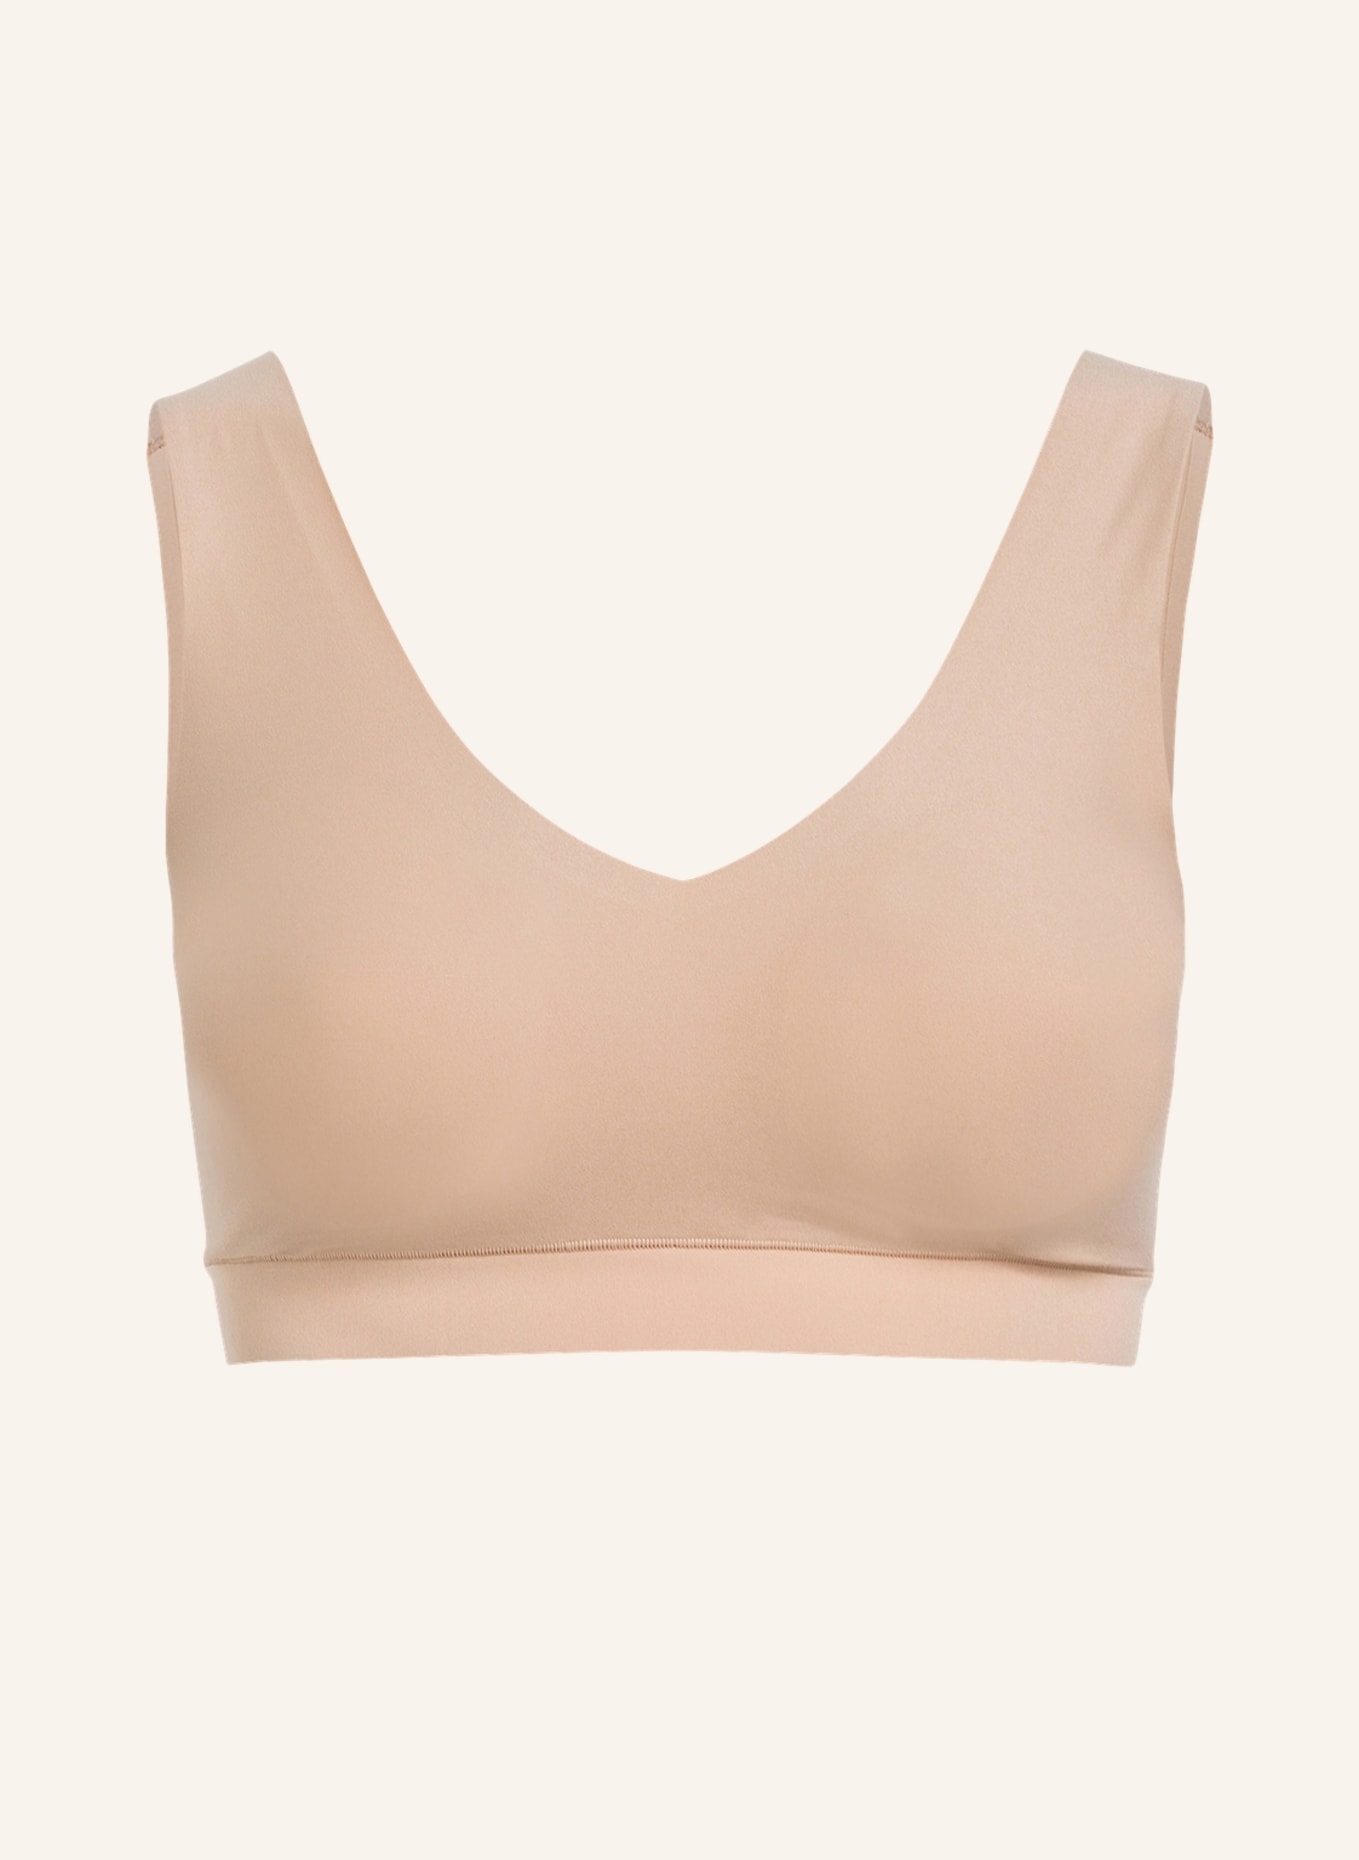 CHANTELLE Bustier SOFTSTRETCH, Farbe: NUDE (Bild 1)